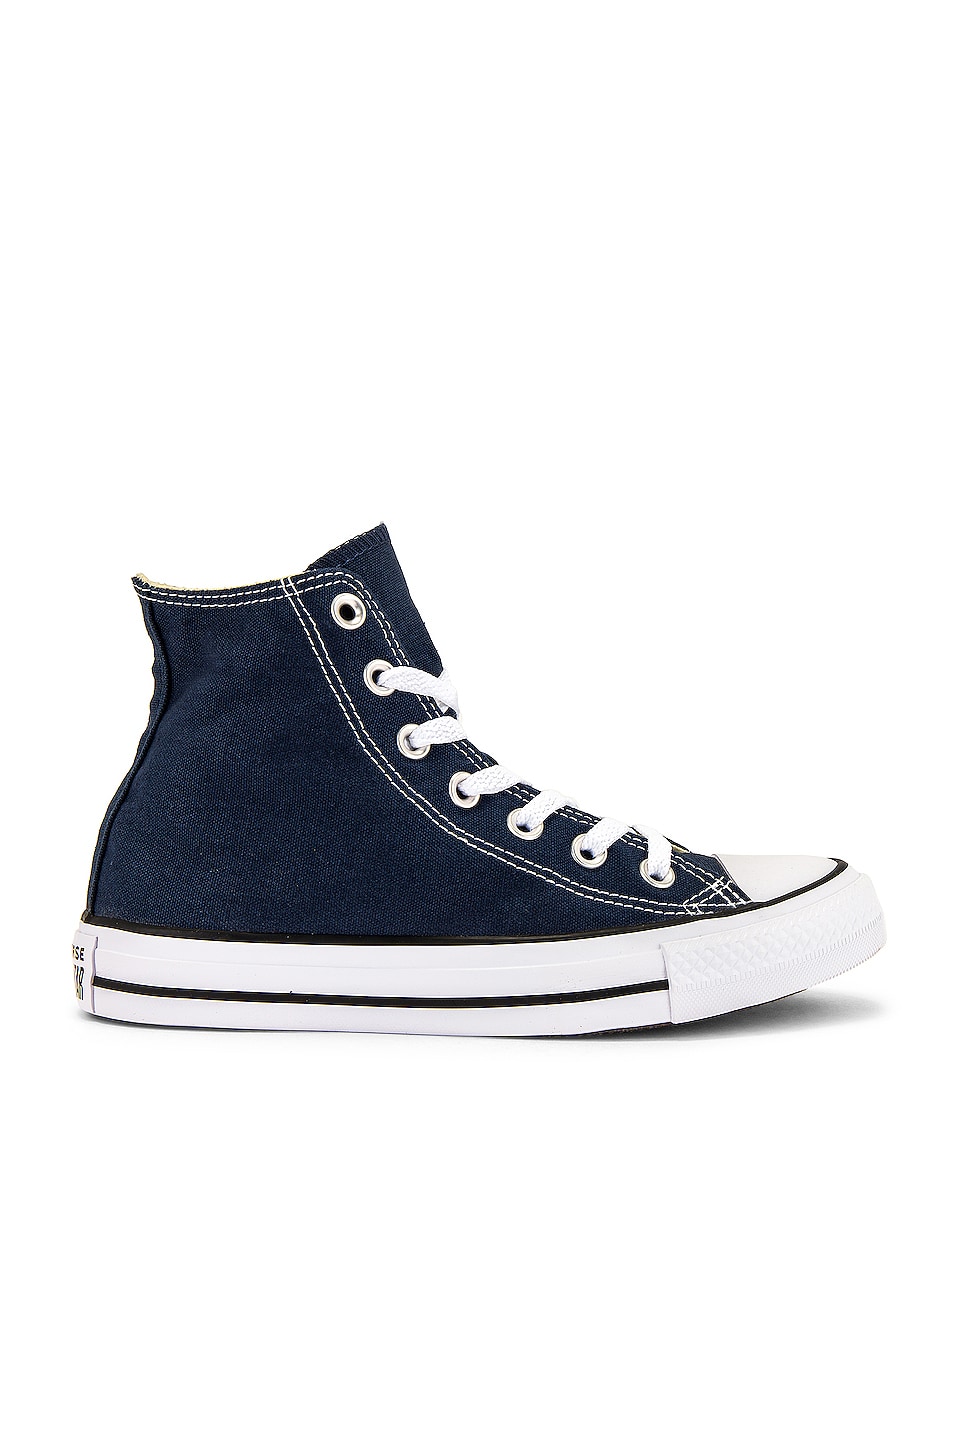 Converse Chuck Taylor All Star Clubhouse Limited Edition Shoes Navy